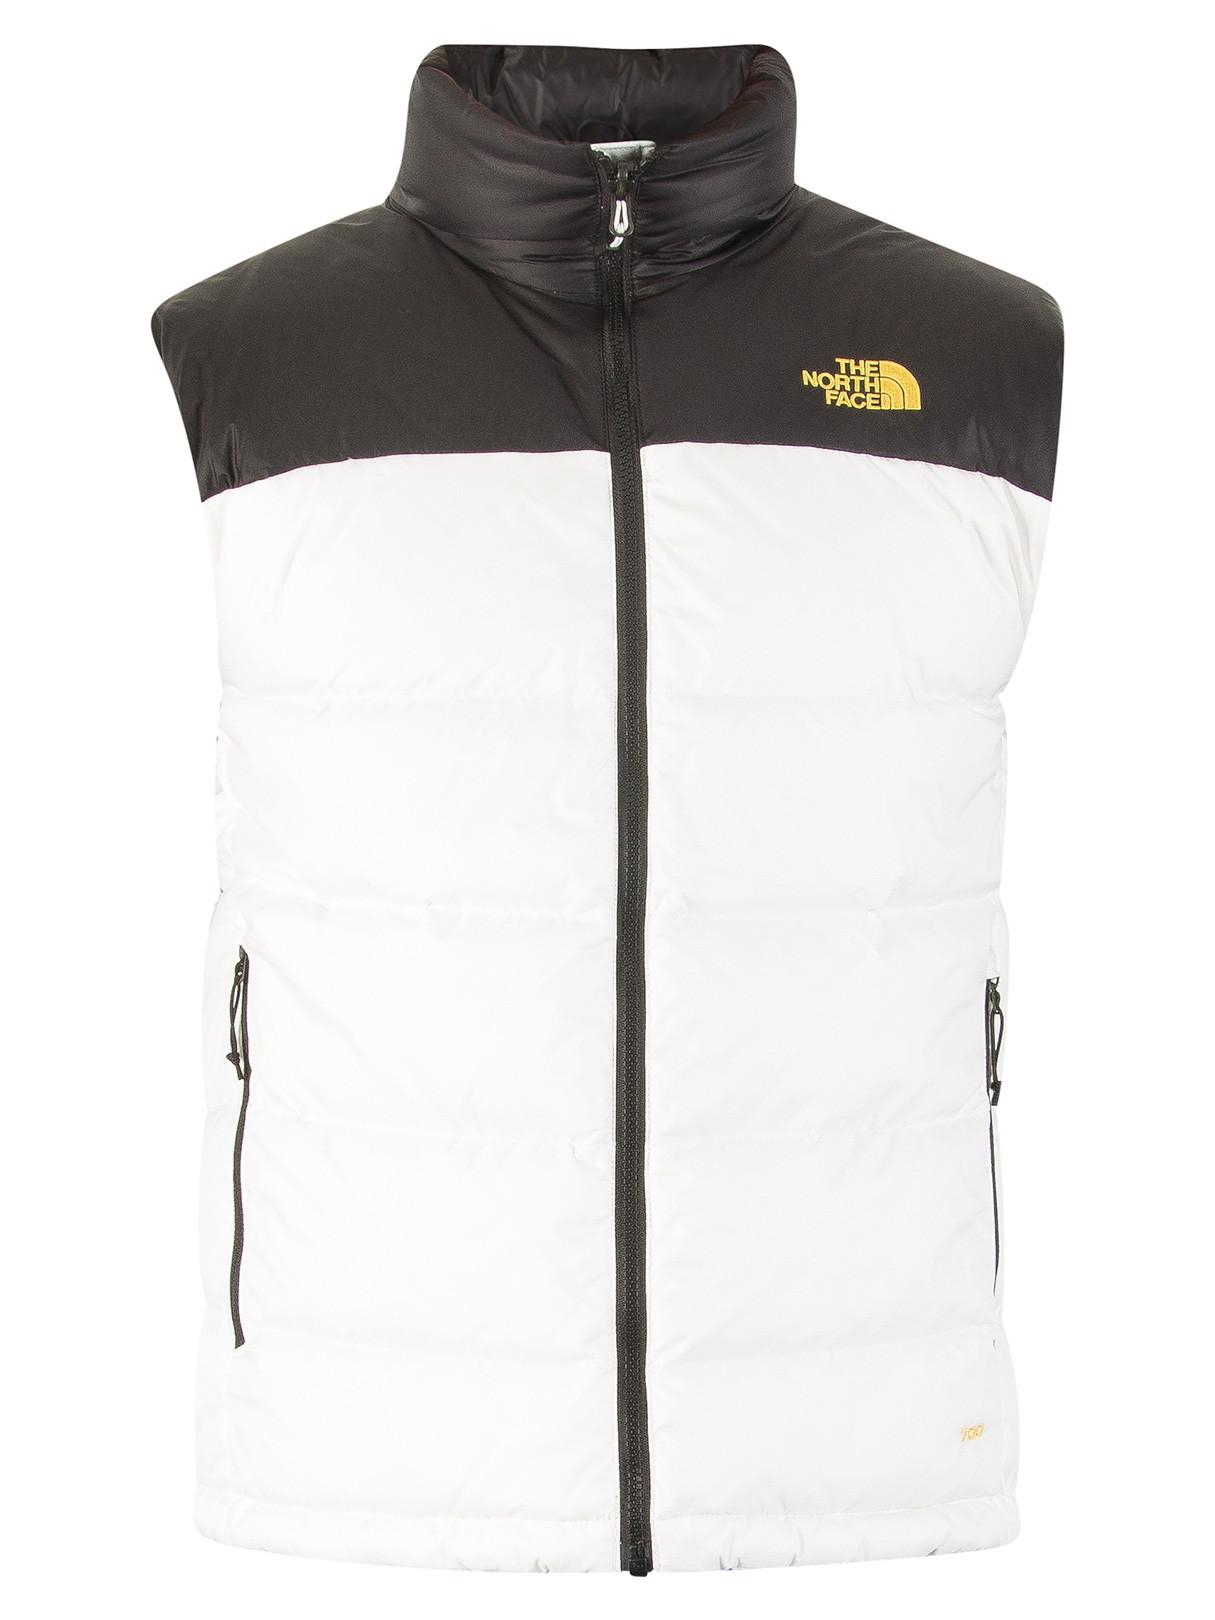 north face gilet white